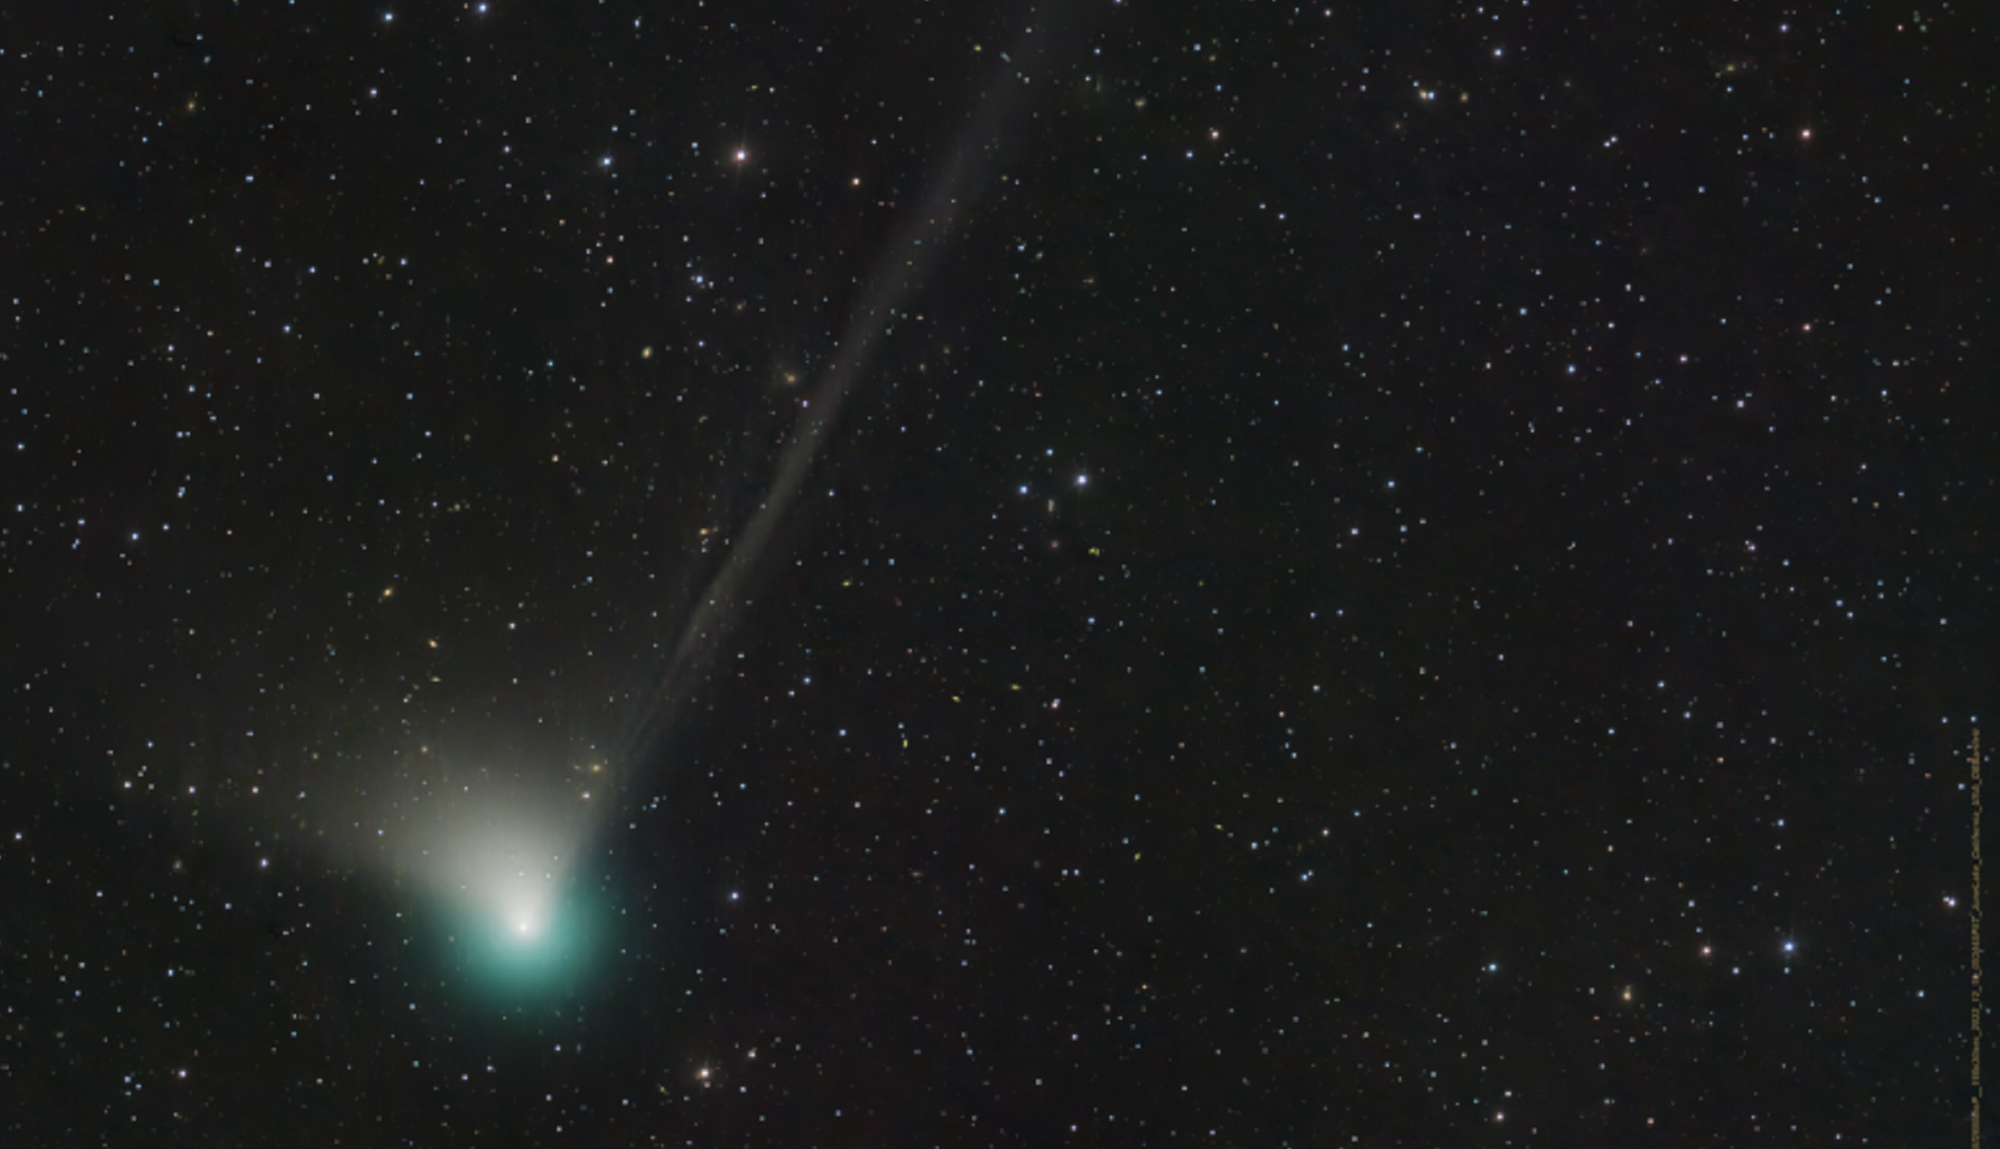 Green comet C/2022 E3 (ZTF) with tail in northern sky